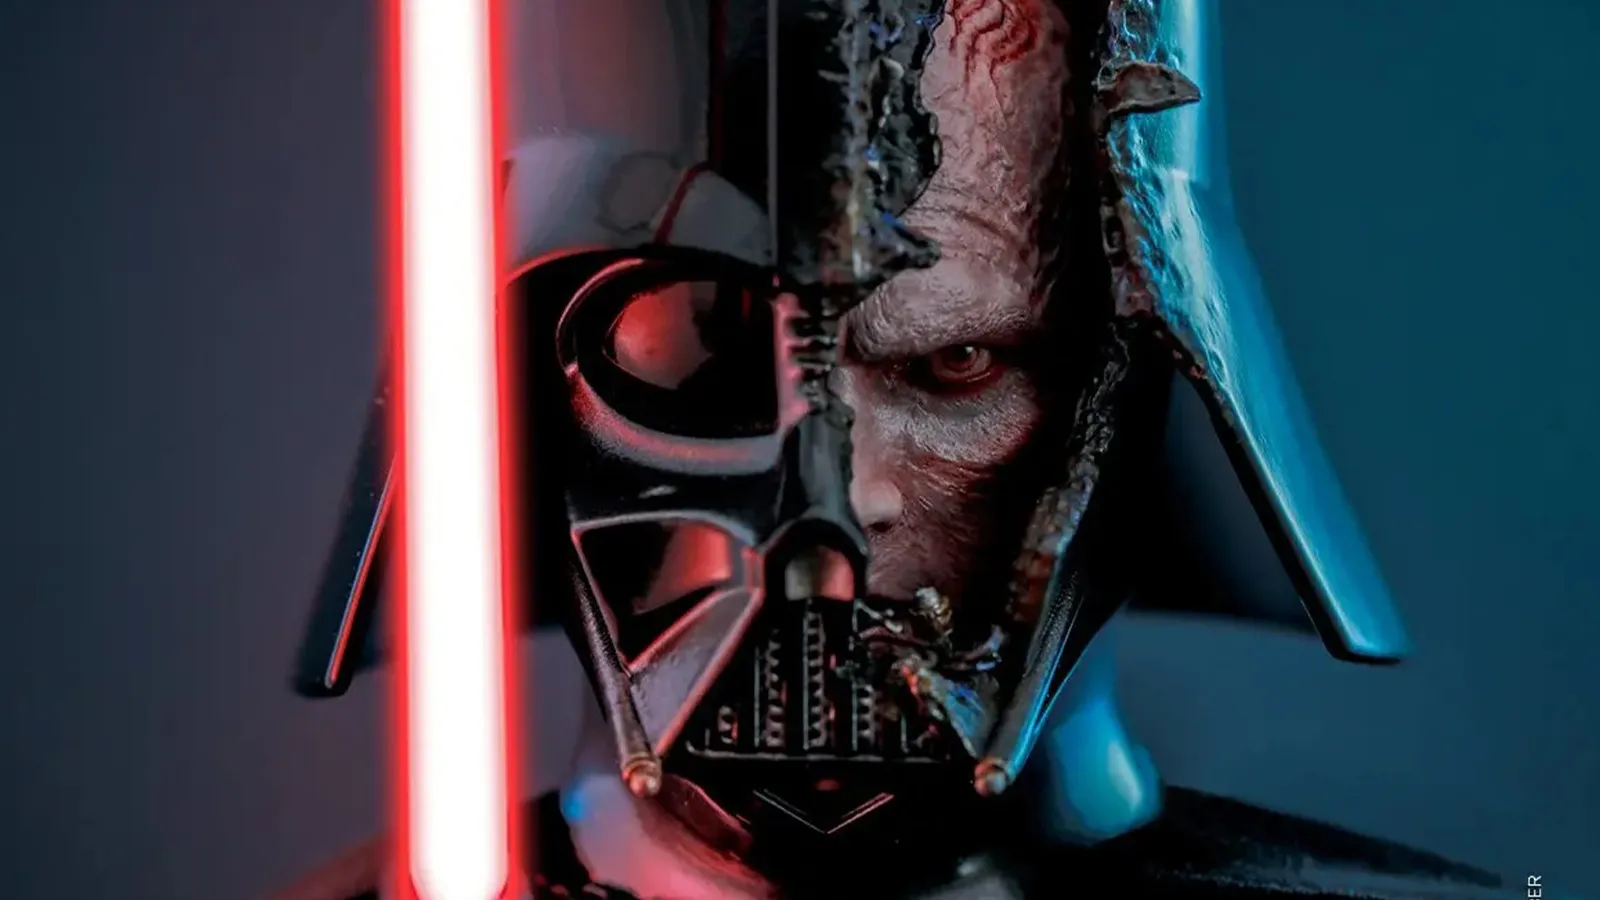 engel Een trouwe Boodschapper Star Wars' Fans Wonder if Somehow, Darth Vader Returning Would Have Been a  Better Choice